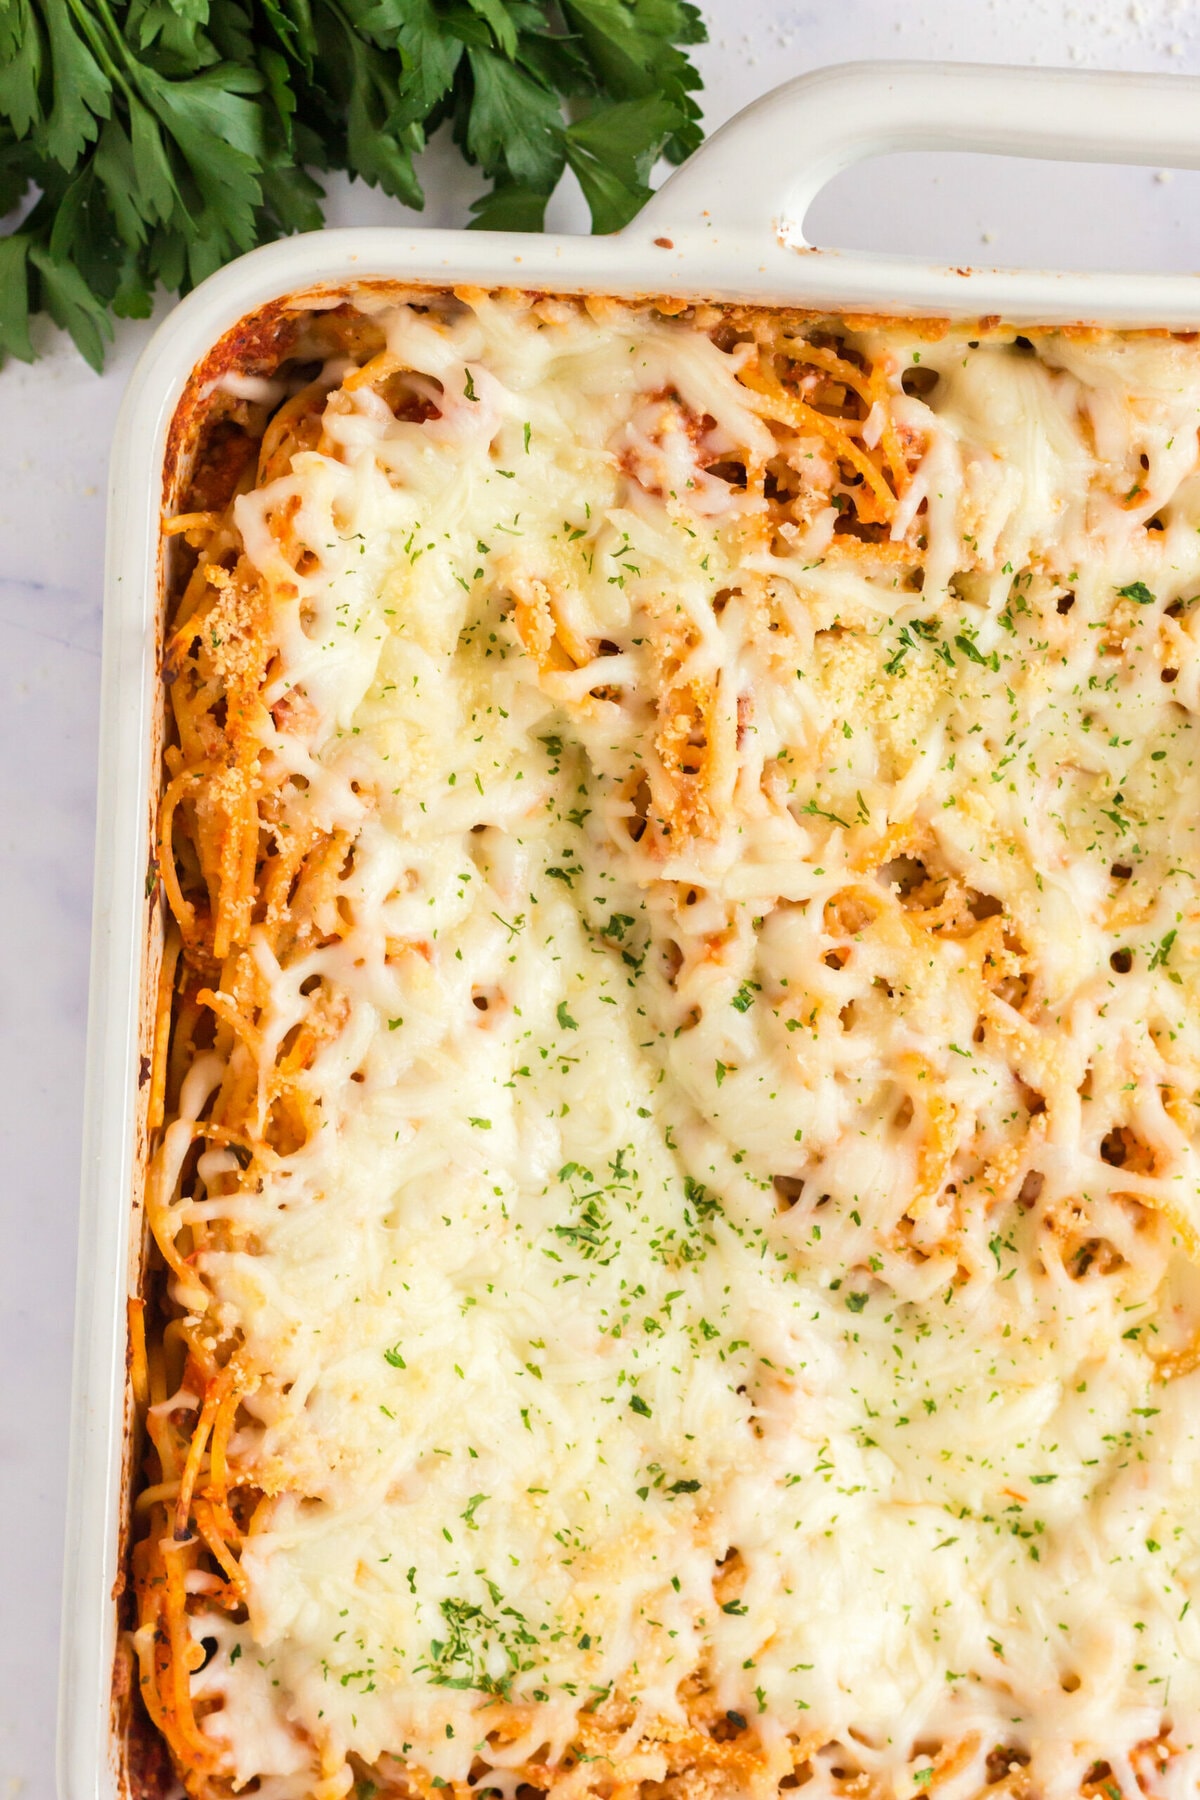 picture of baked spaghetti with melted cheese in a white casserole dish